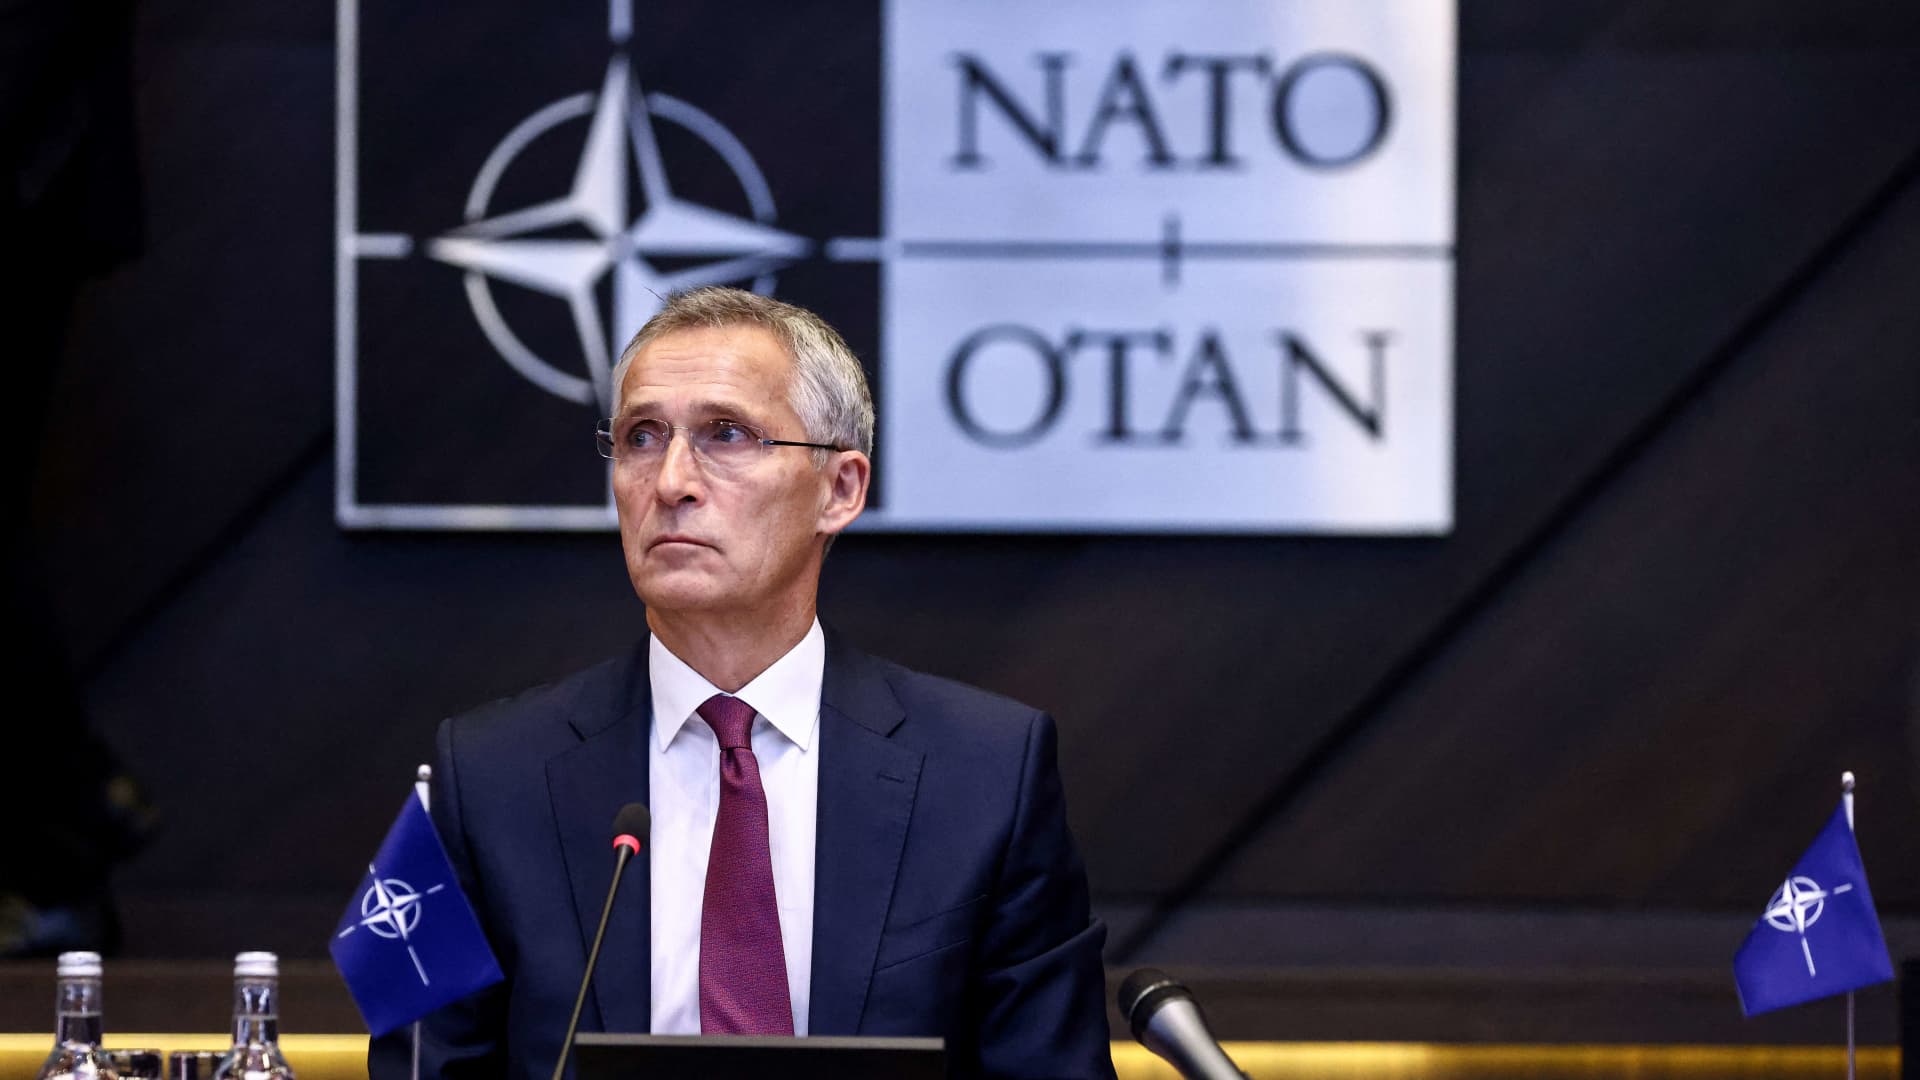 NATO Secretary General Jens Stoltenberg is seen ahead of a meeting of the alliance's Defence Ministers at the NATO headquarters in Brussels on October 13, 2022.